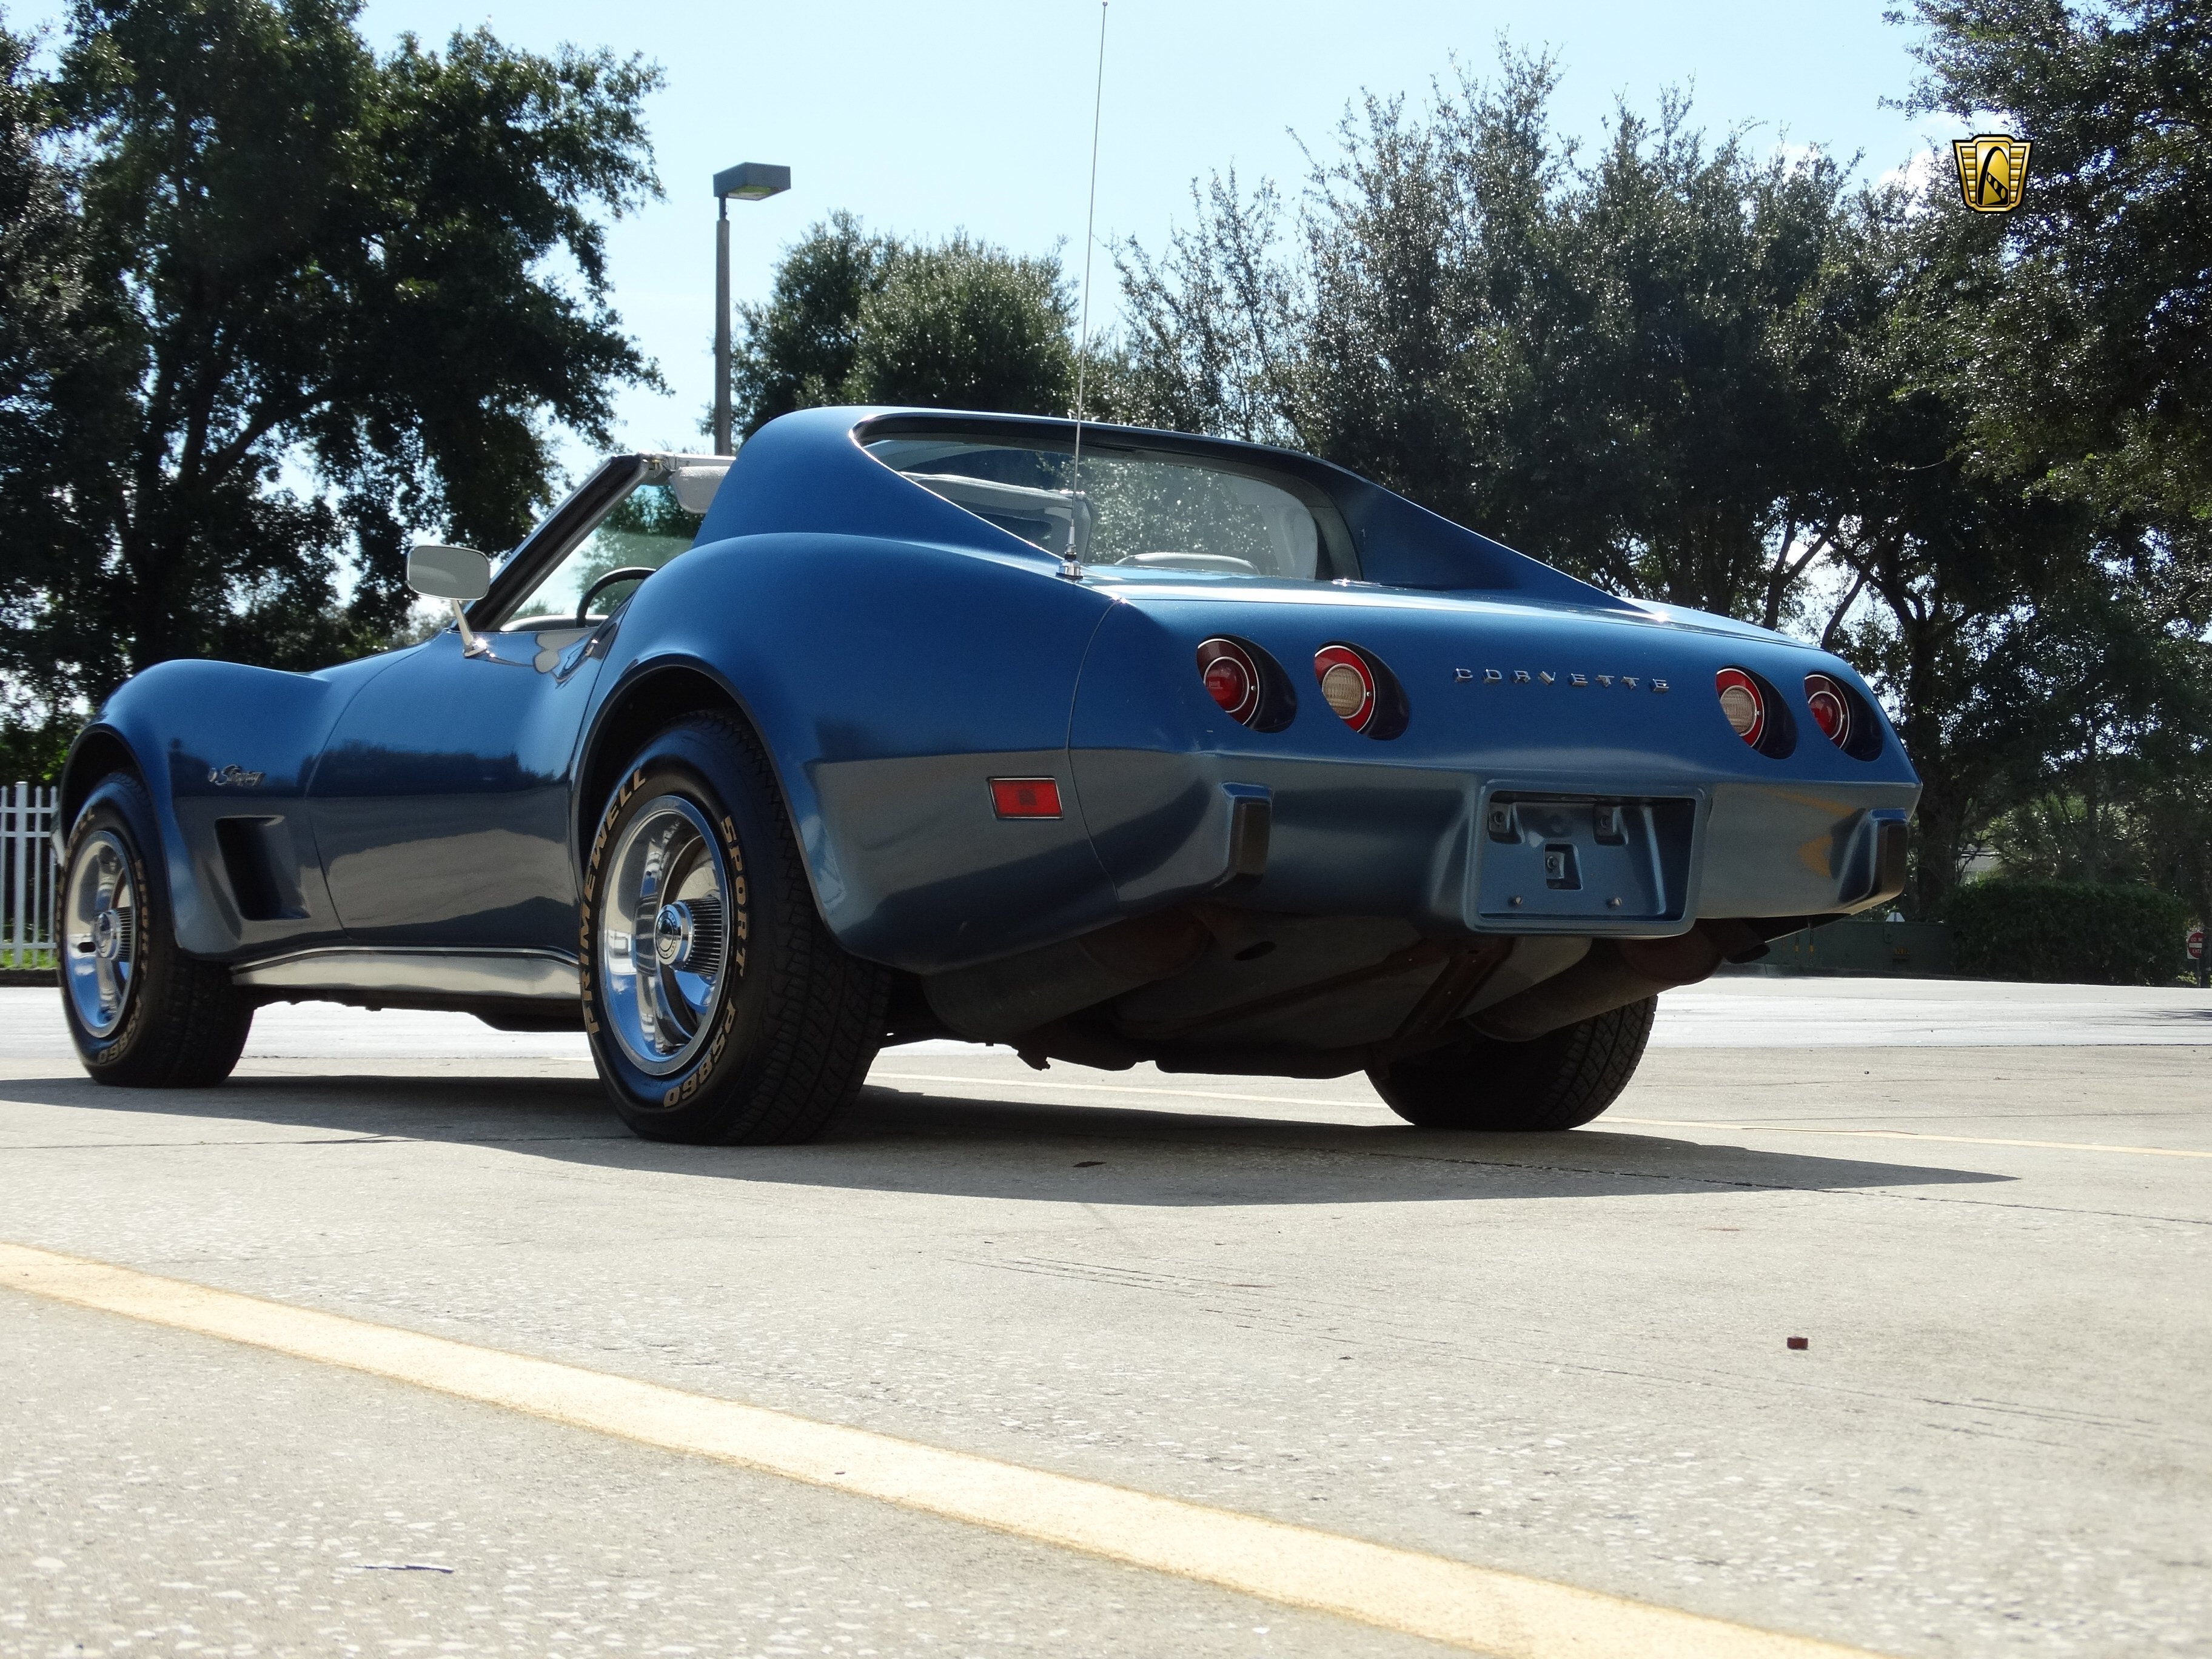 1975, Chevrolet, Classic, Corvette, Muscle, Old, Original, Ray, Sting, Usa, Blue Wallpaper